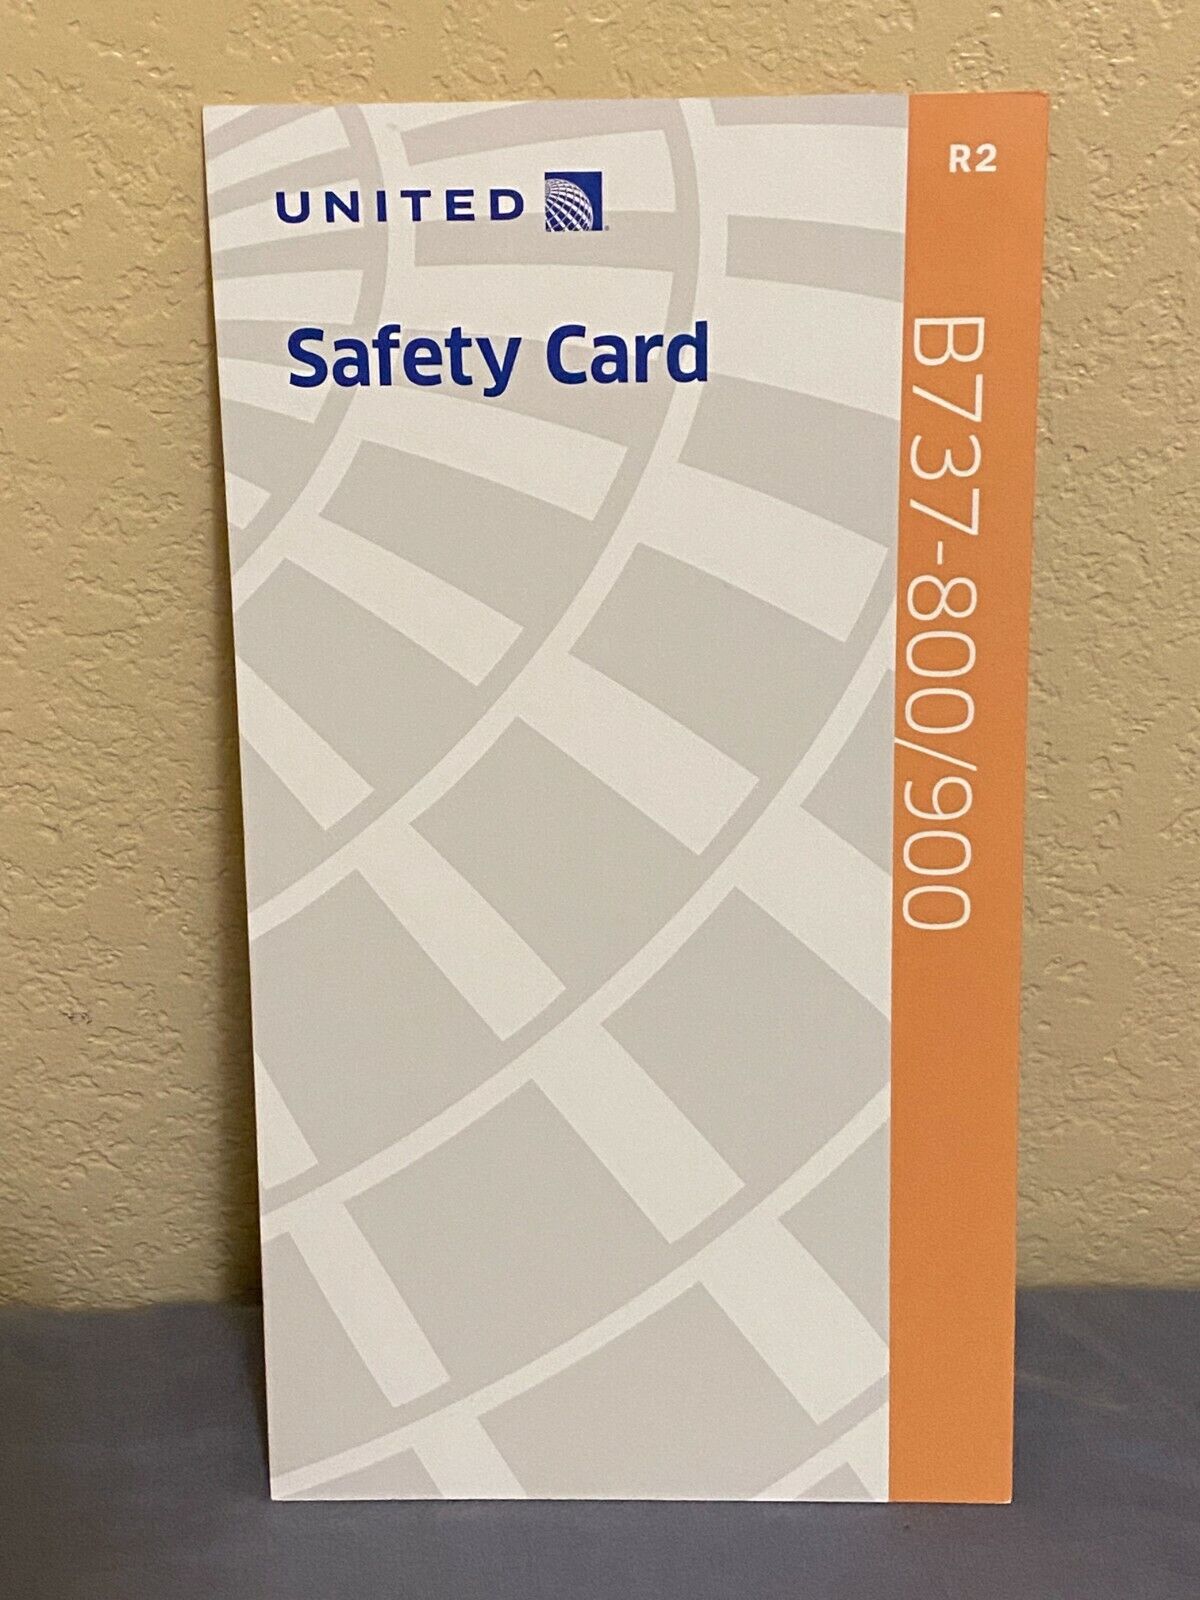 United Airlines Boeing 737 -800/900 Aircraft Passenger Safety Card R2 GREAT 